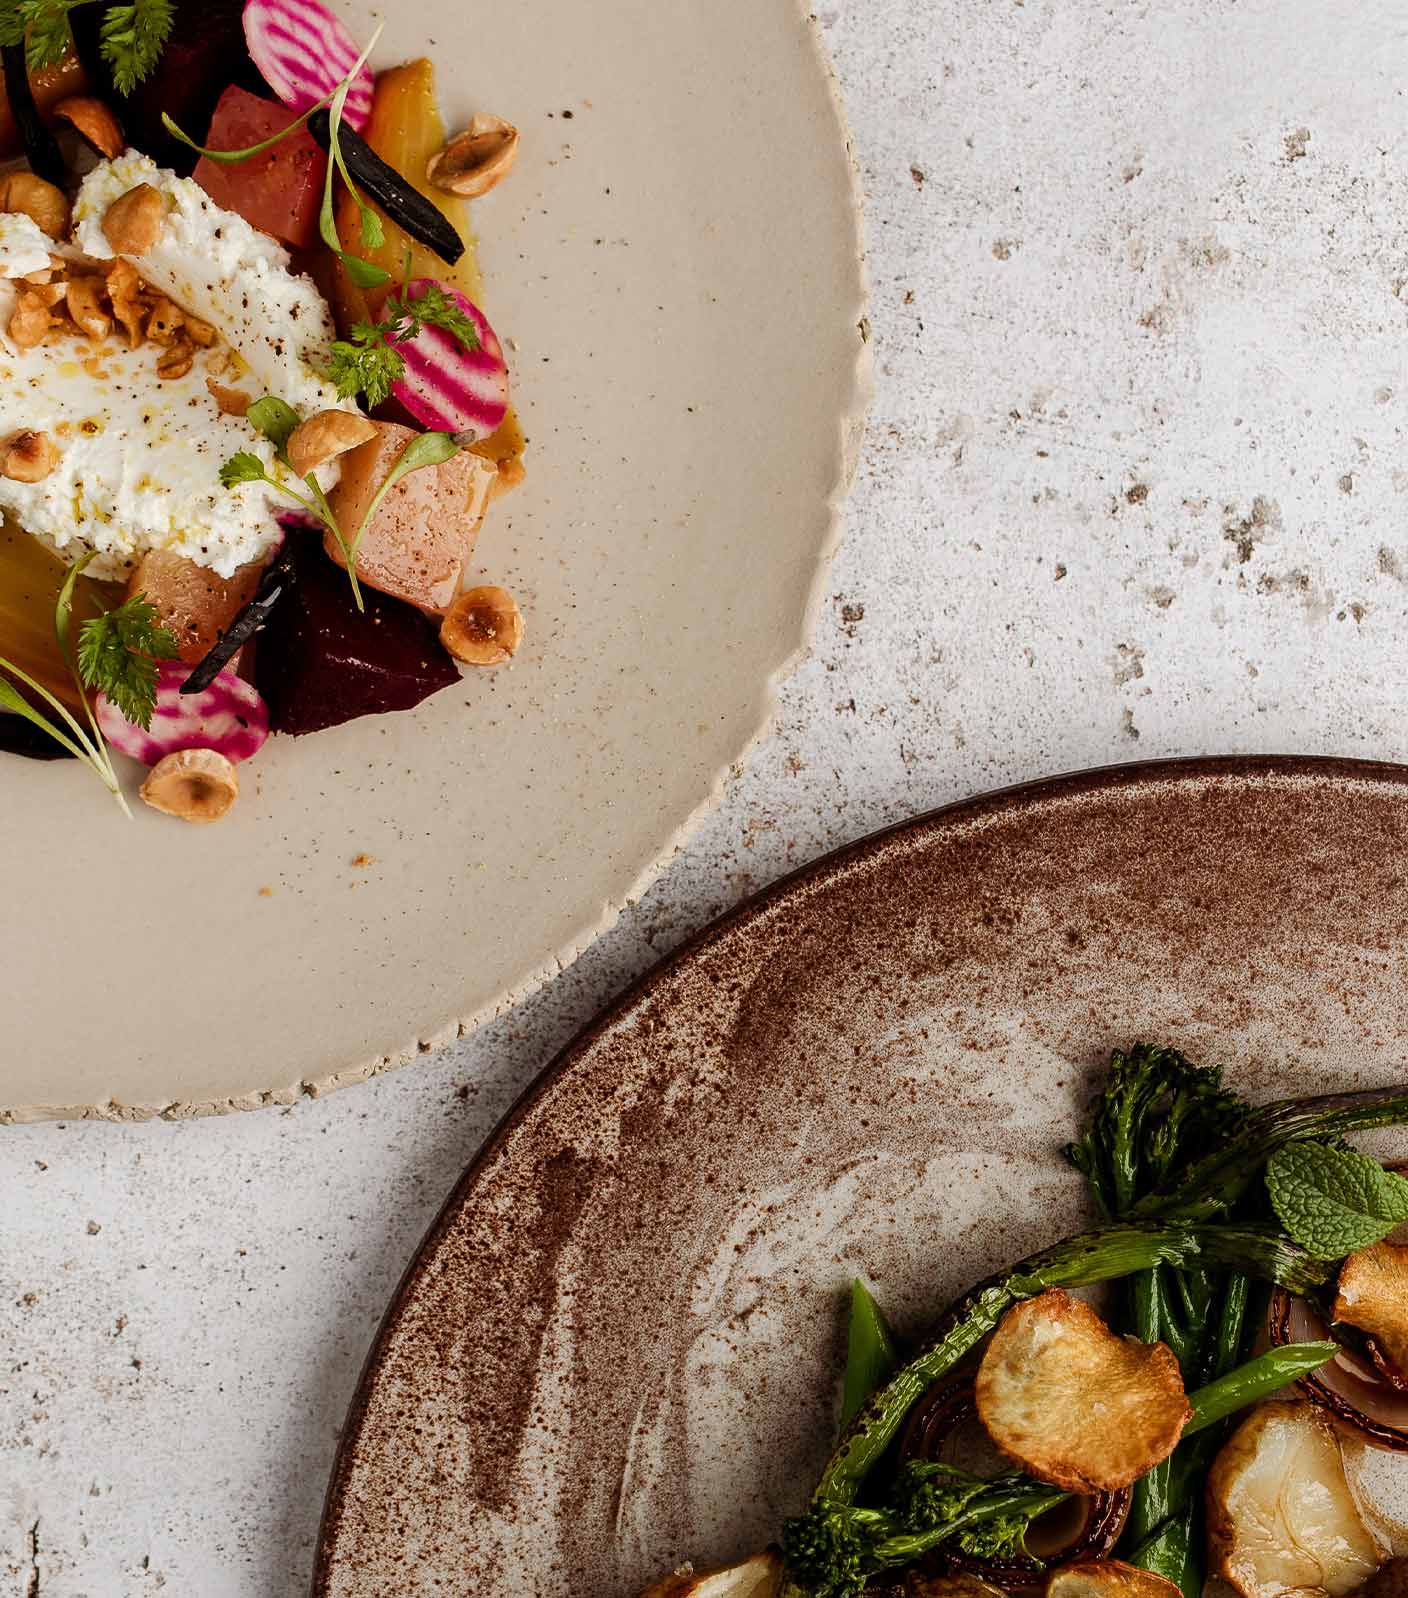 Two healthy, delicious, vegetarian dishes on ceramic plates on a white concrete table shot from above.